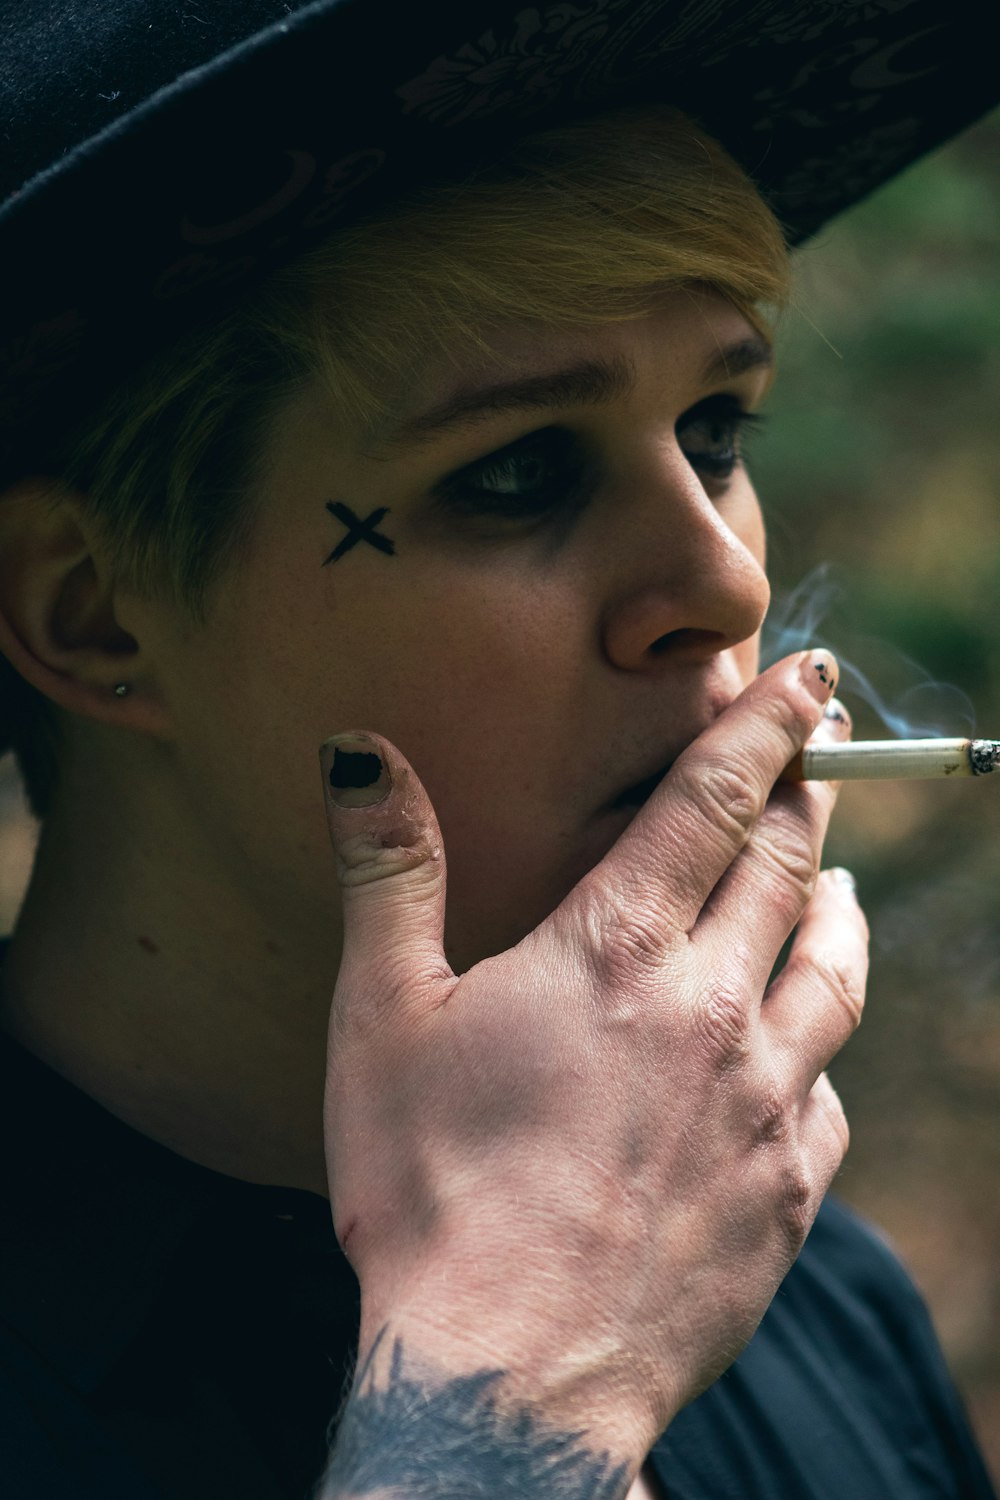 a woman smoking a cigarette with a cross on her forehead